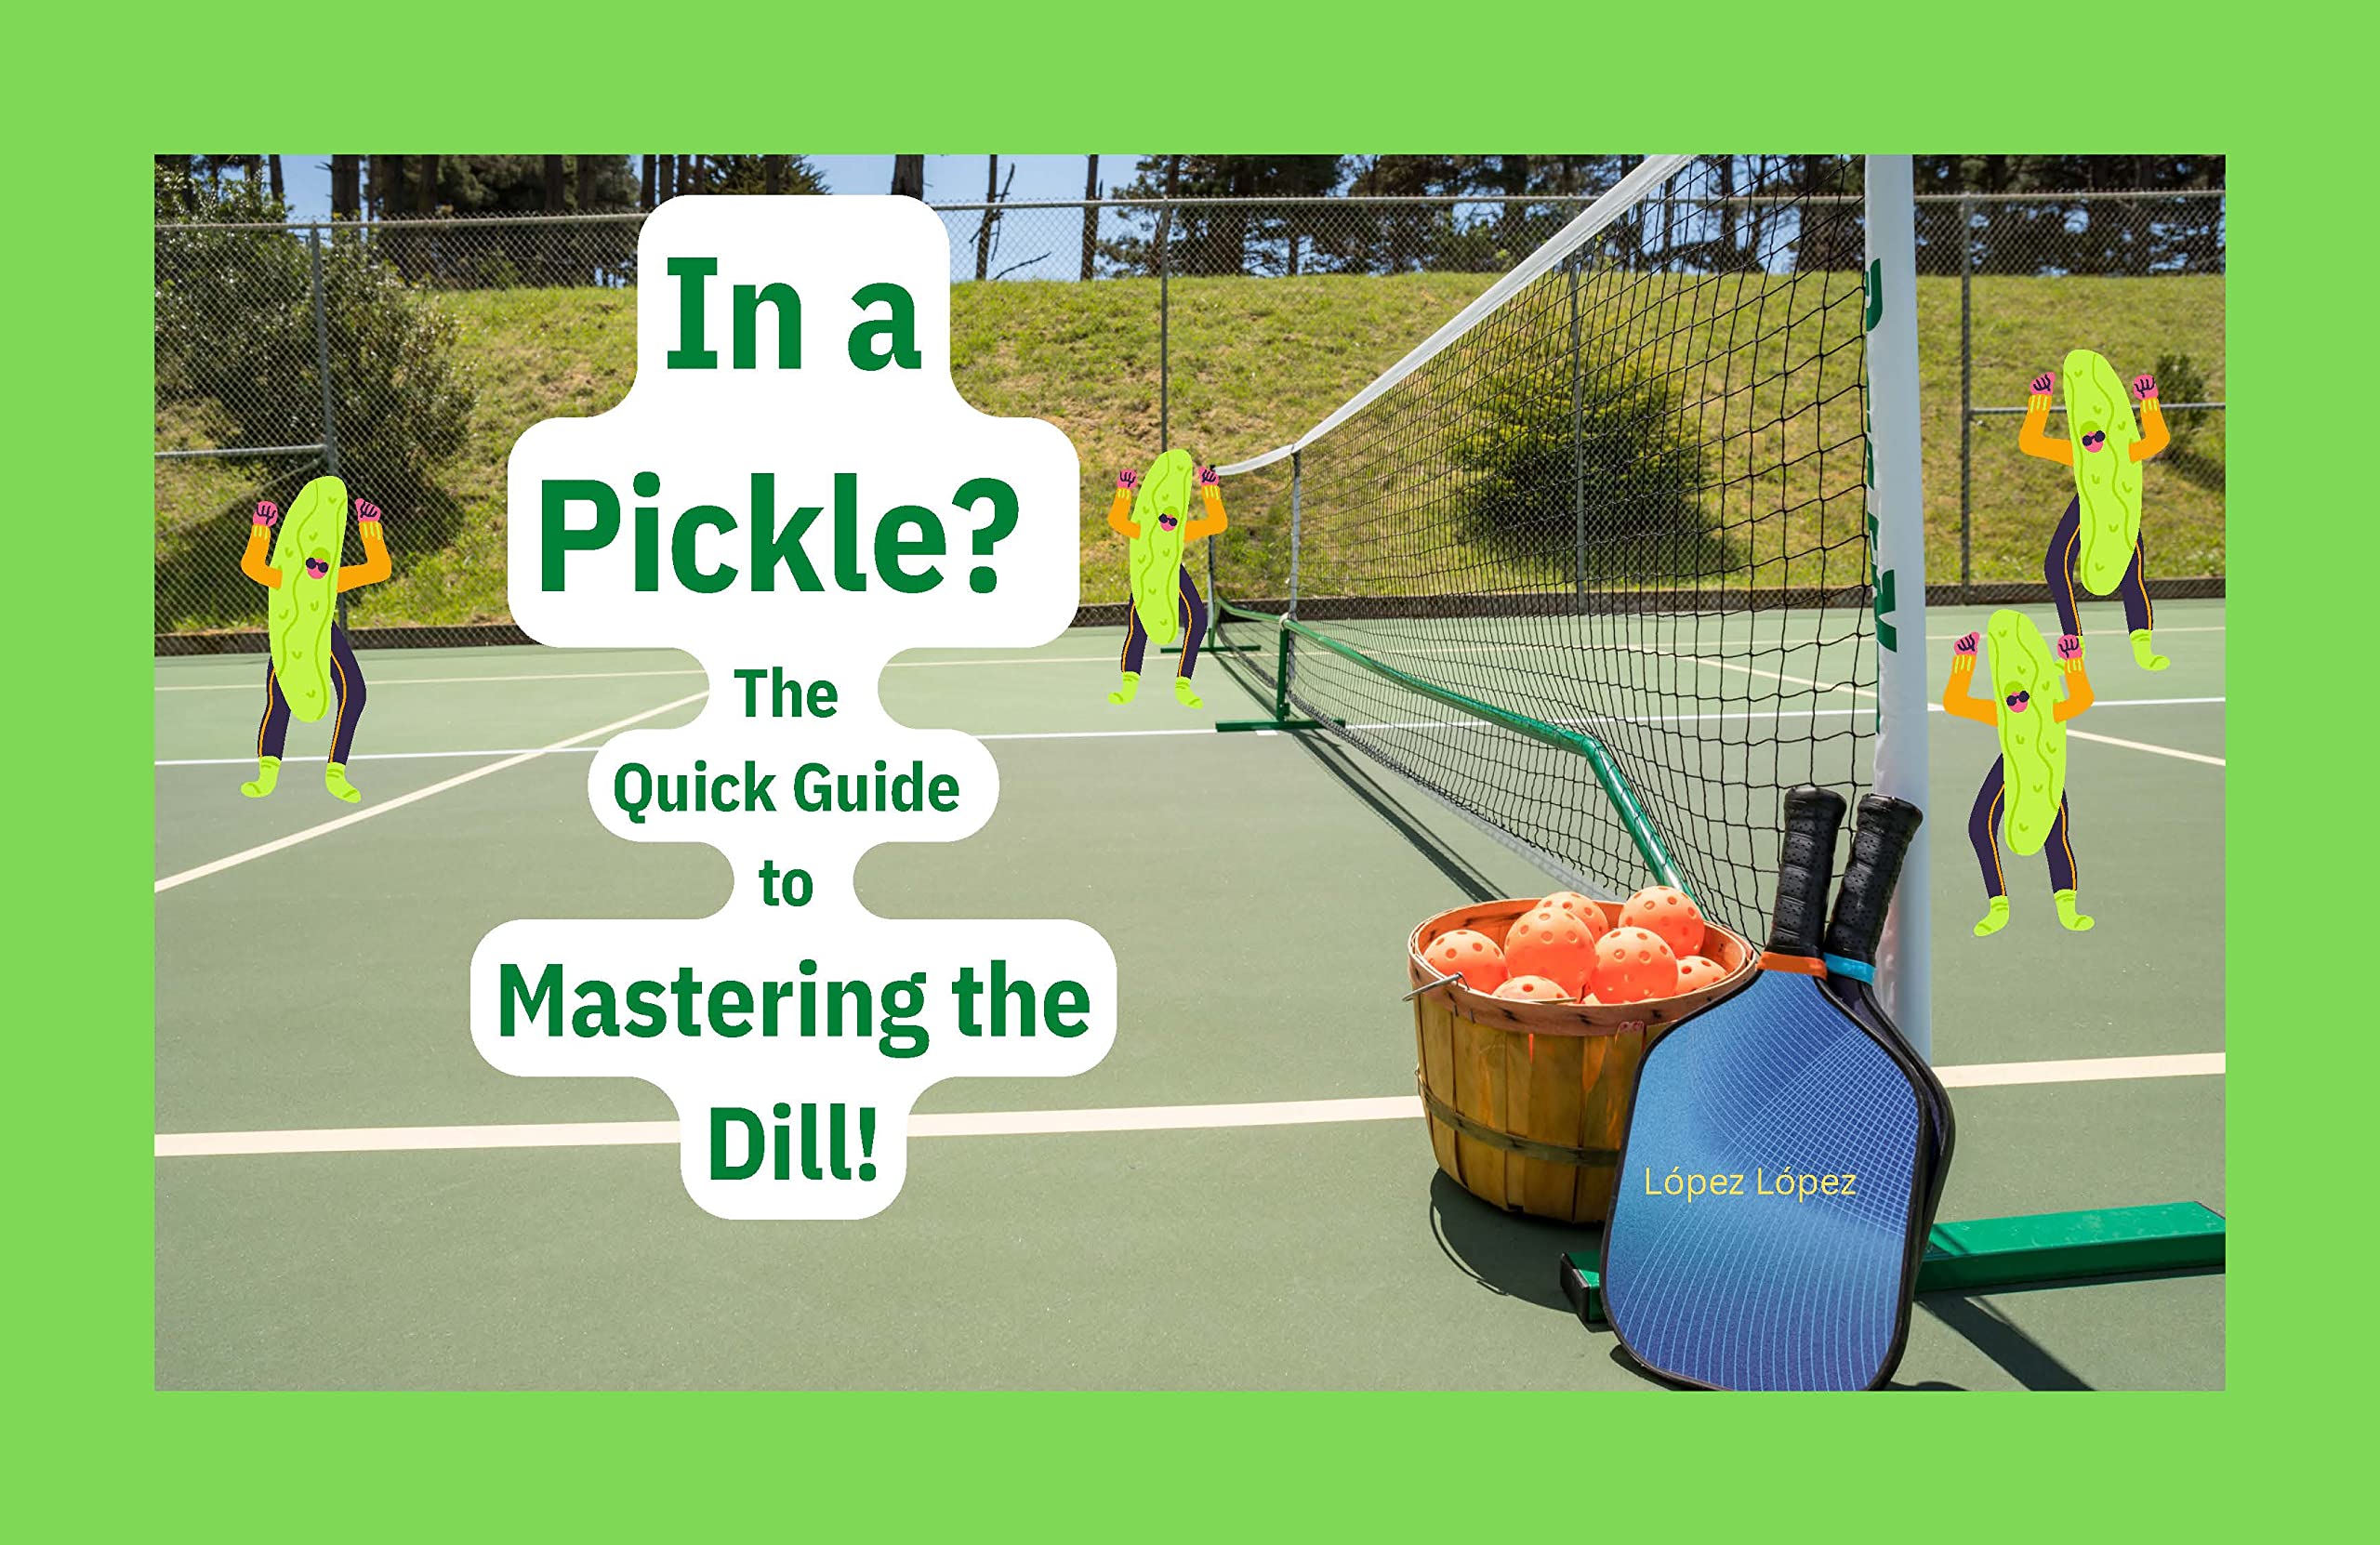 In a Pickle?: Quick Guide to Mastering the Dill